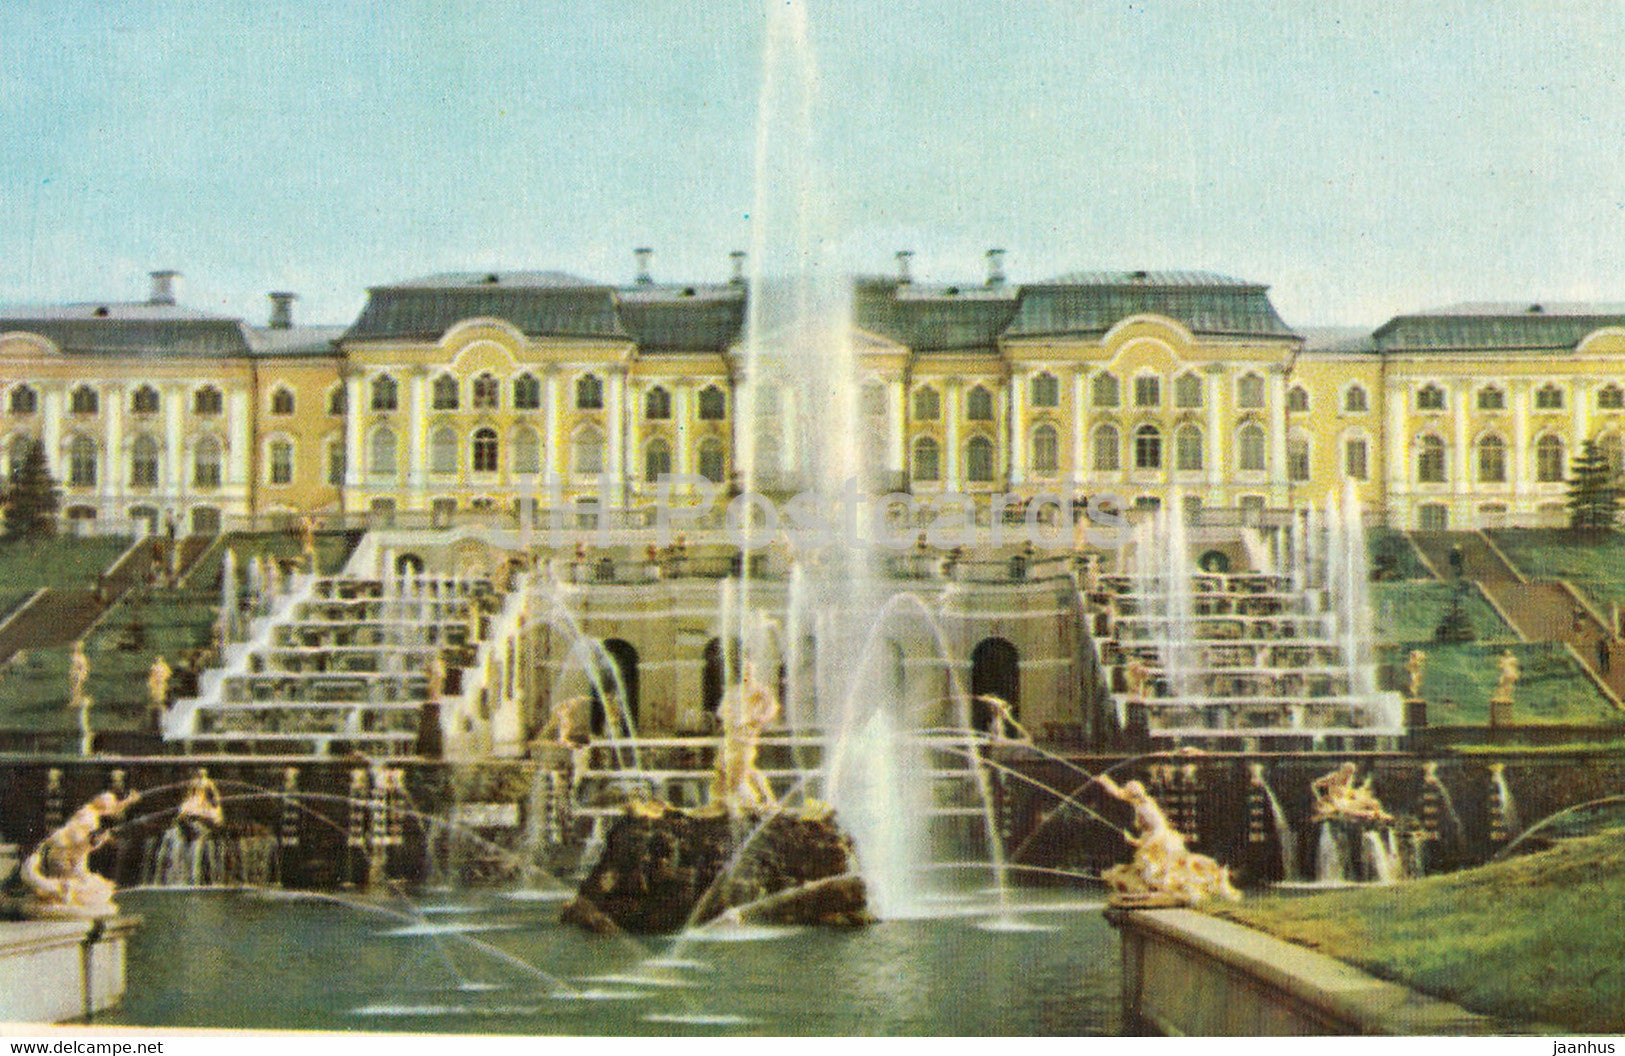 Petrodvorets - Great Palace and the Great Cascade - 1966 - Russia USSR - unused - JH Postcards